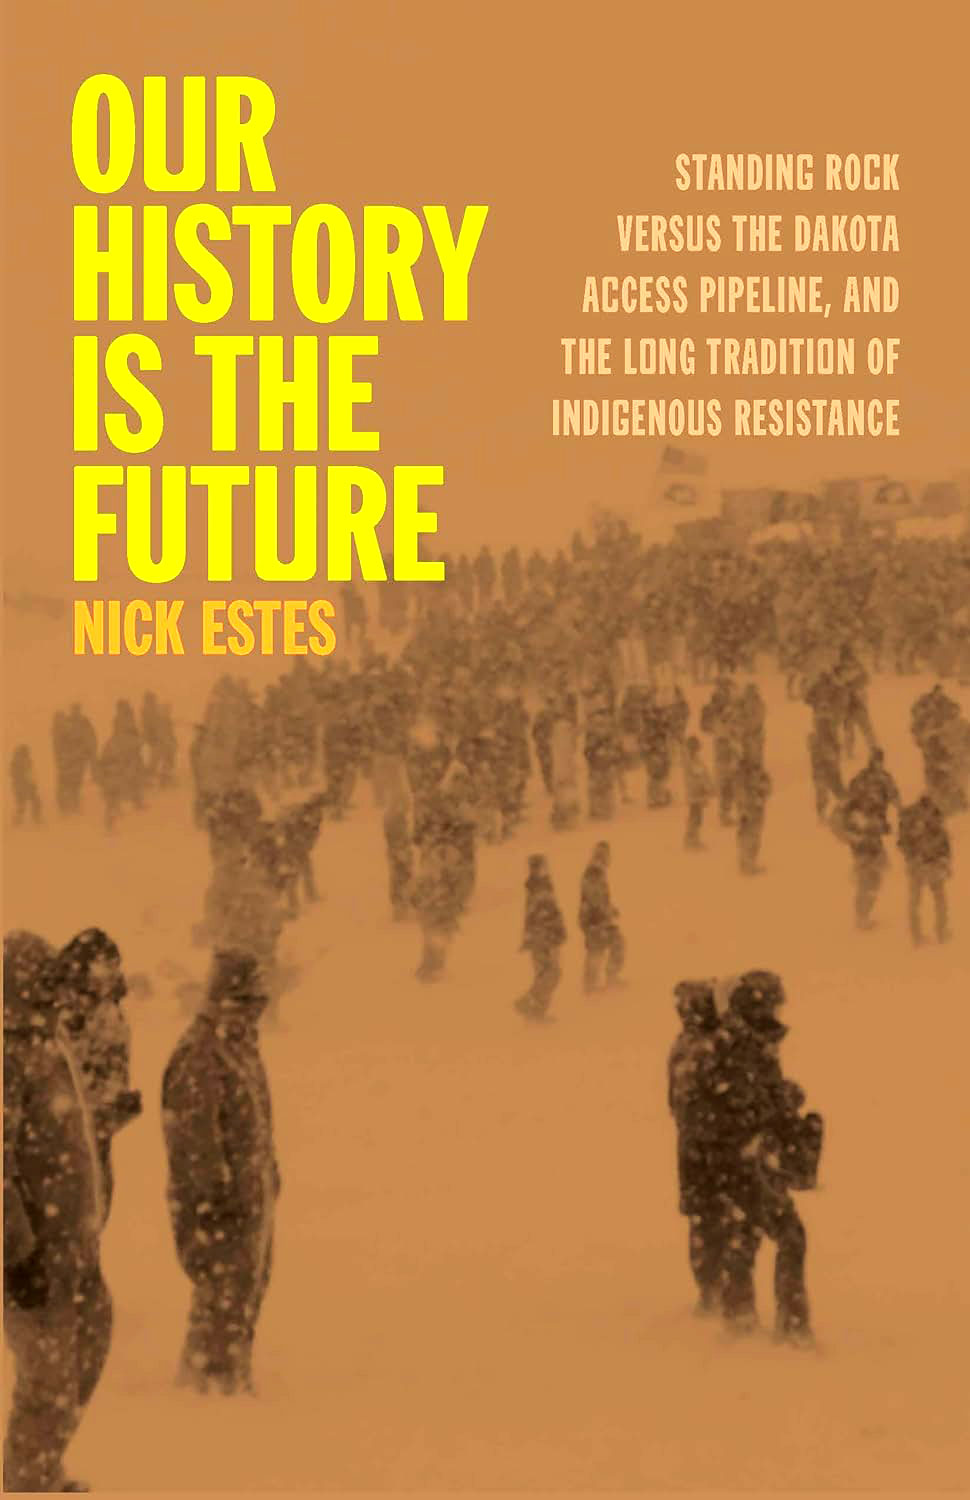  Our History Is the Future: Standing Rock Versus the Dakota Access Pipeline, and the Long Tradition of Indigenous Resistance by Nick Estes